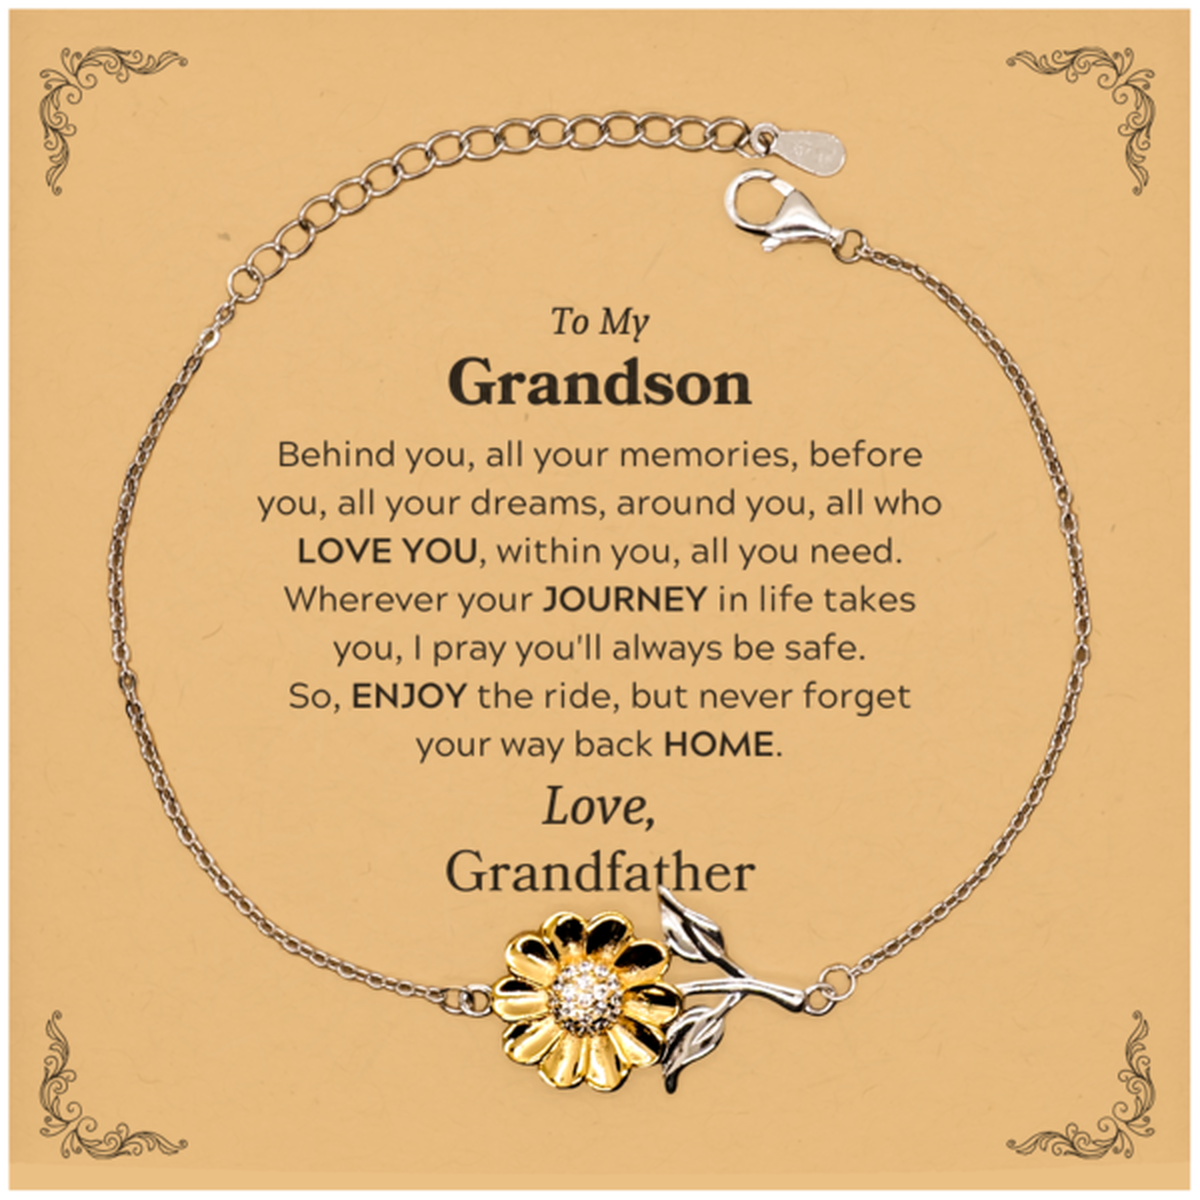 To My Grandson Graduation Gifts from Grandfather, Grandson Sunflower Bracelet Christmas Birthday Gifts for Grandson Behind you, all your memories, before you, all your dreams. Love, Grandfather